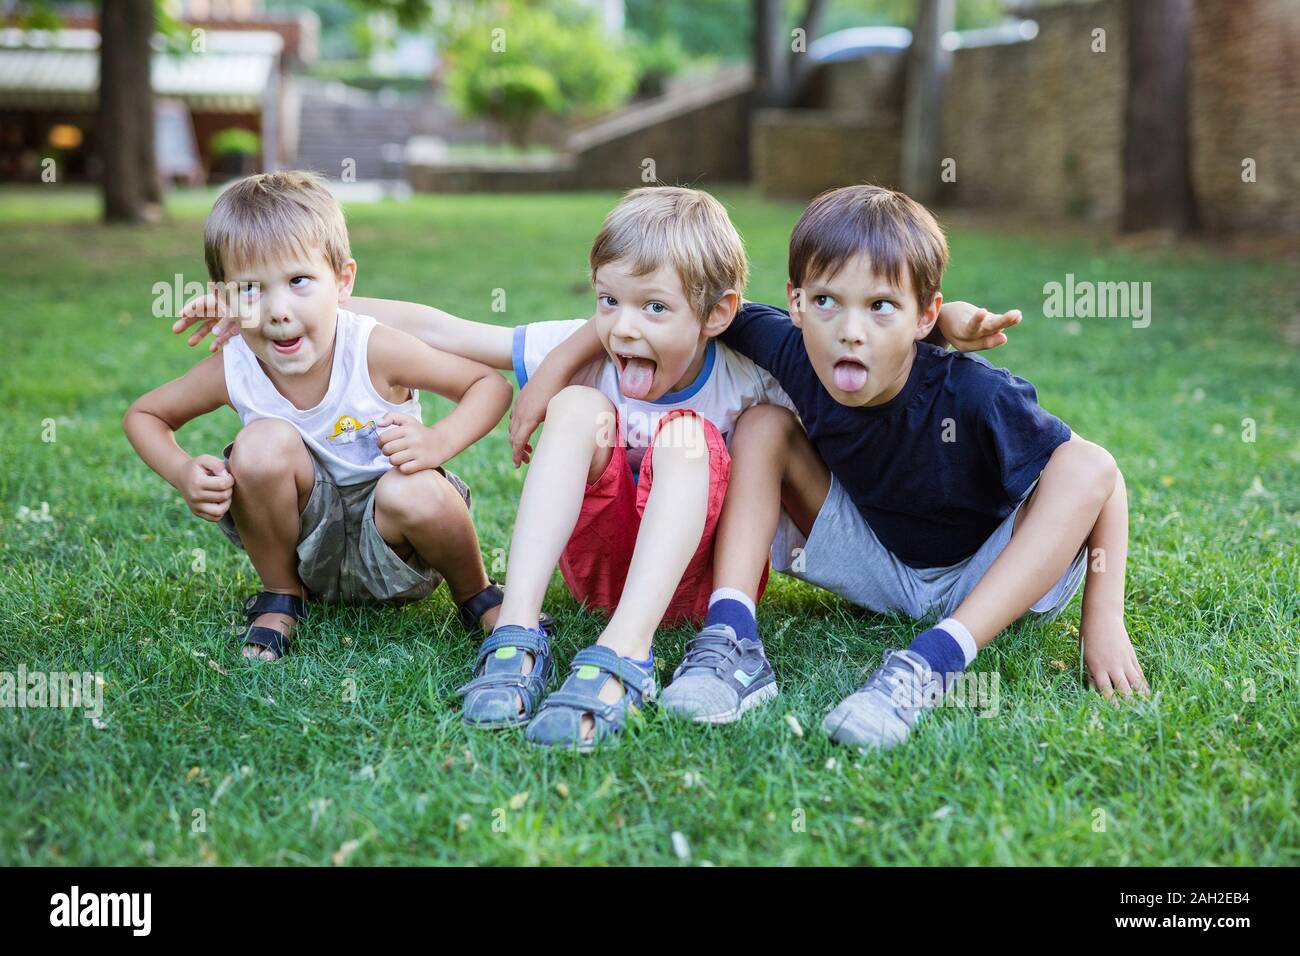 Three young boys making weird grimace faces in summer park. Friends or siblings having fun outdoors. Stock Photo